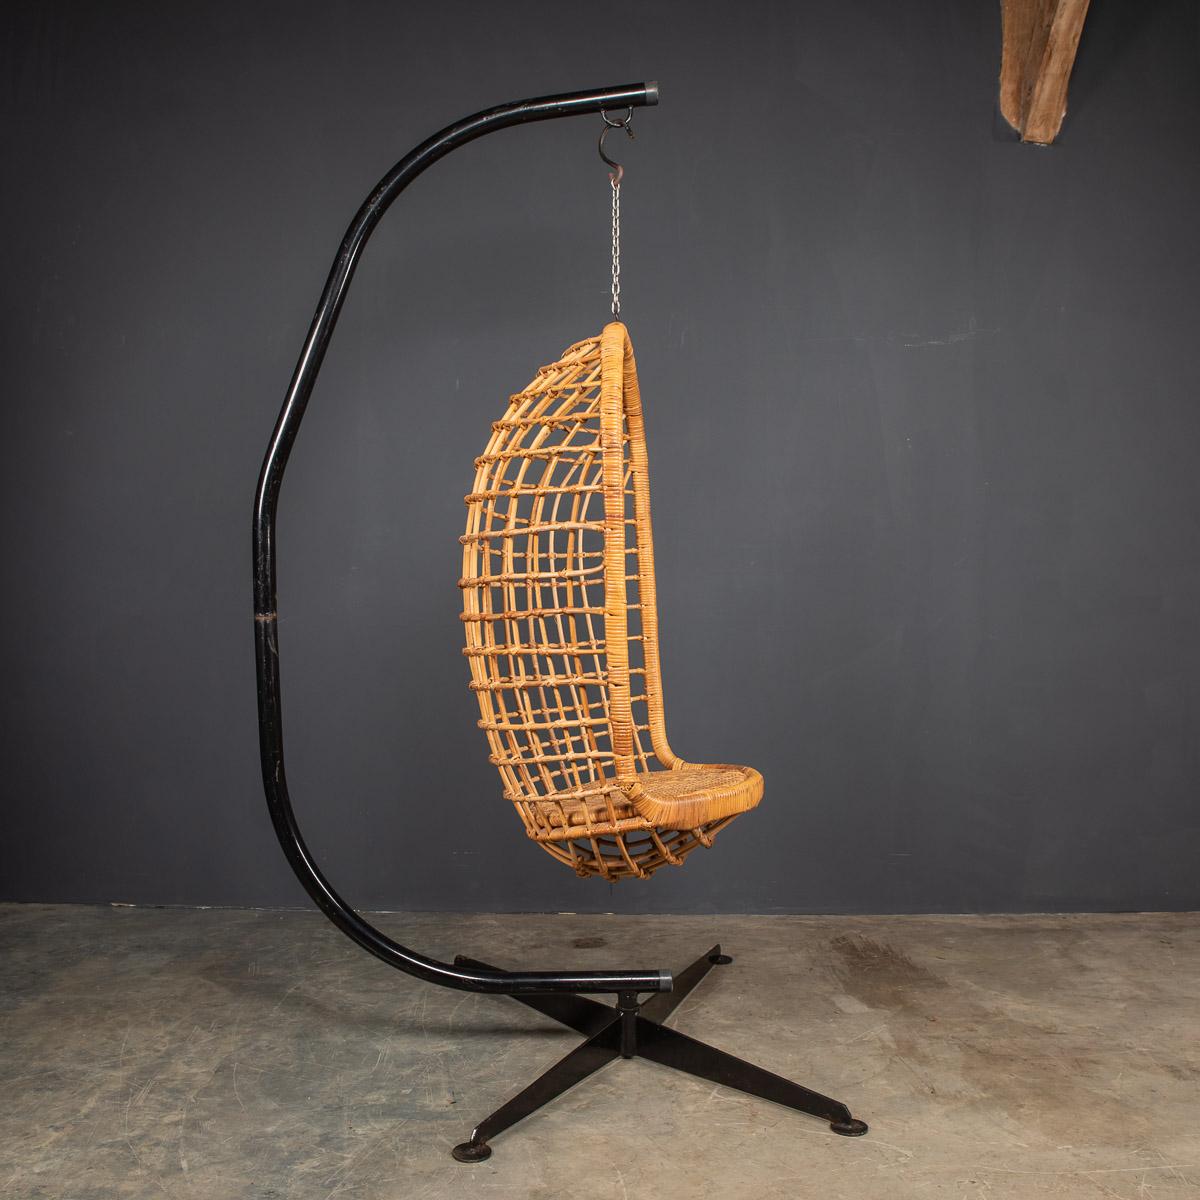 20th Century Hanging Wicker Woven Chair on Steel Frame, 1970s For Sale 1